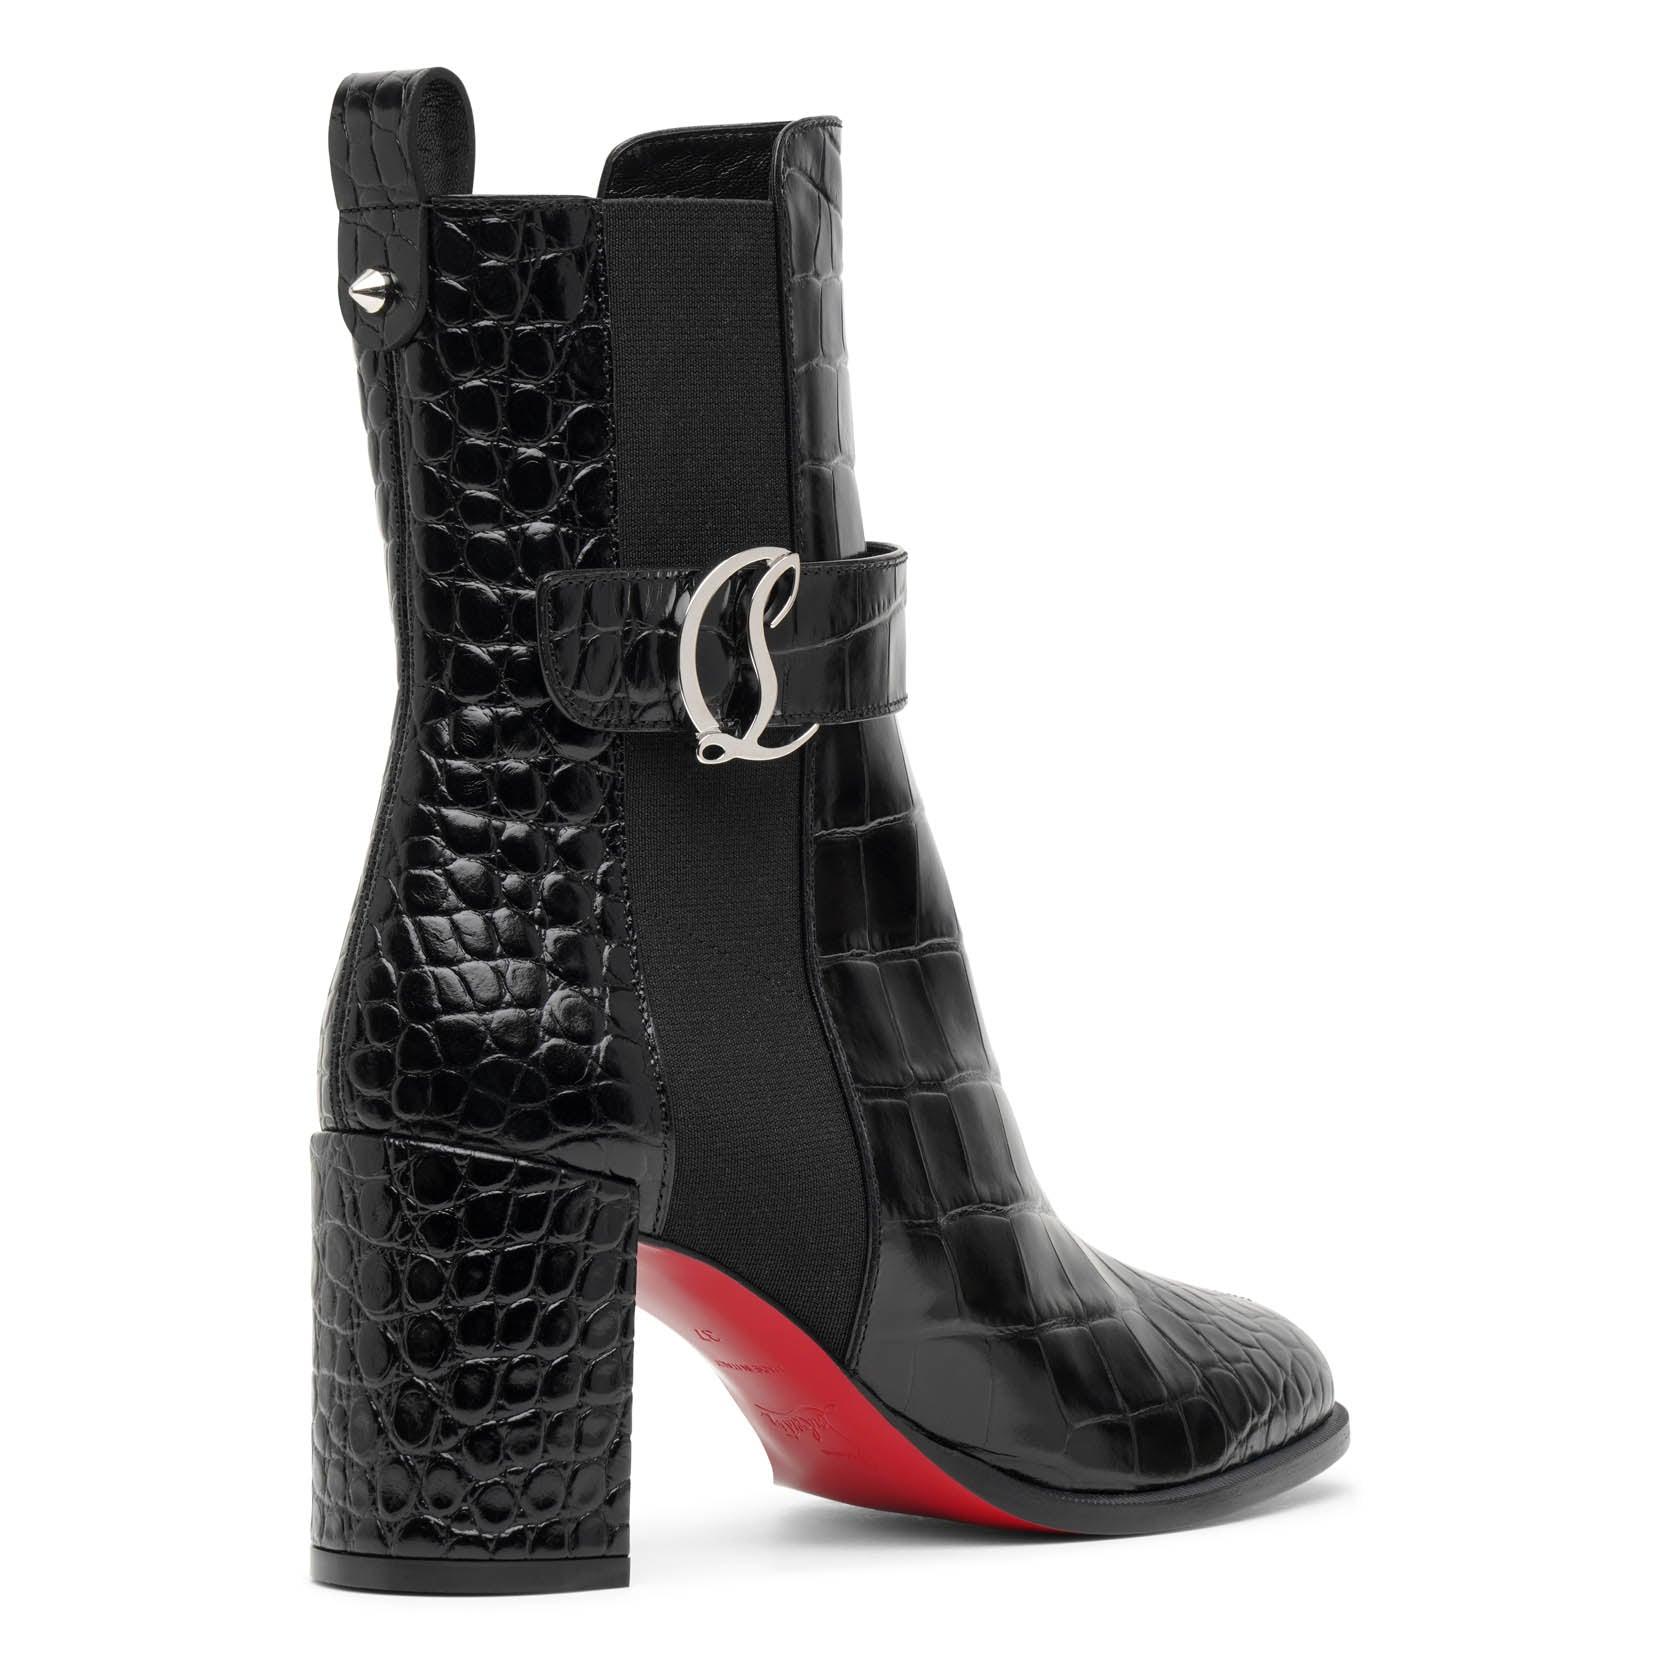 CL Chelsea Leather Ankle Boots in Black - Christian Louboutin